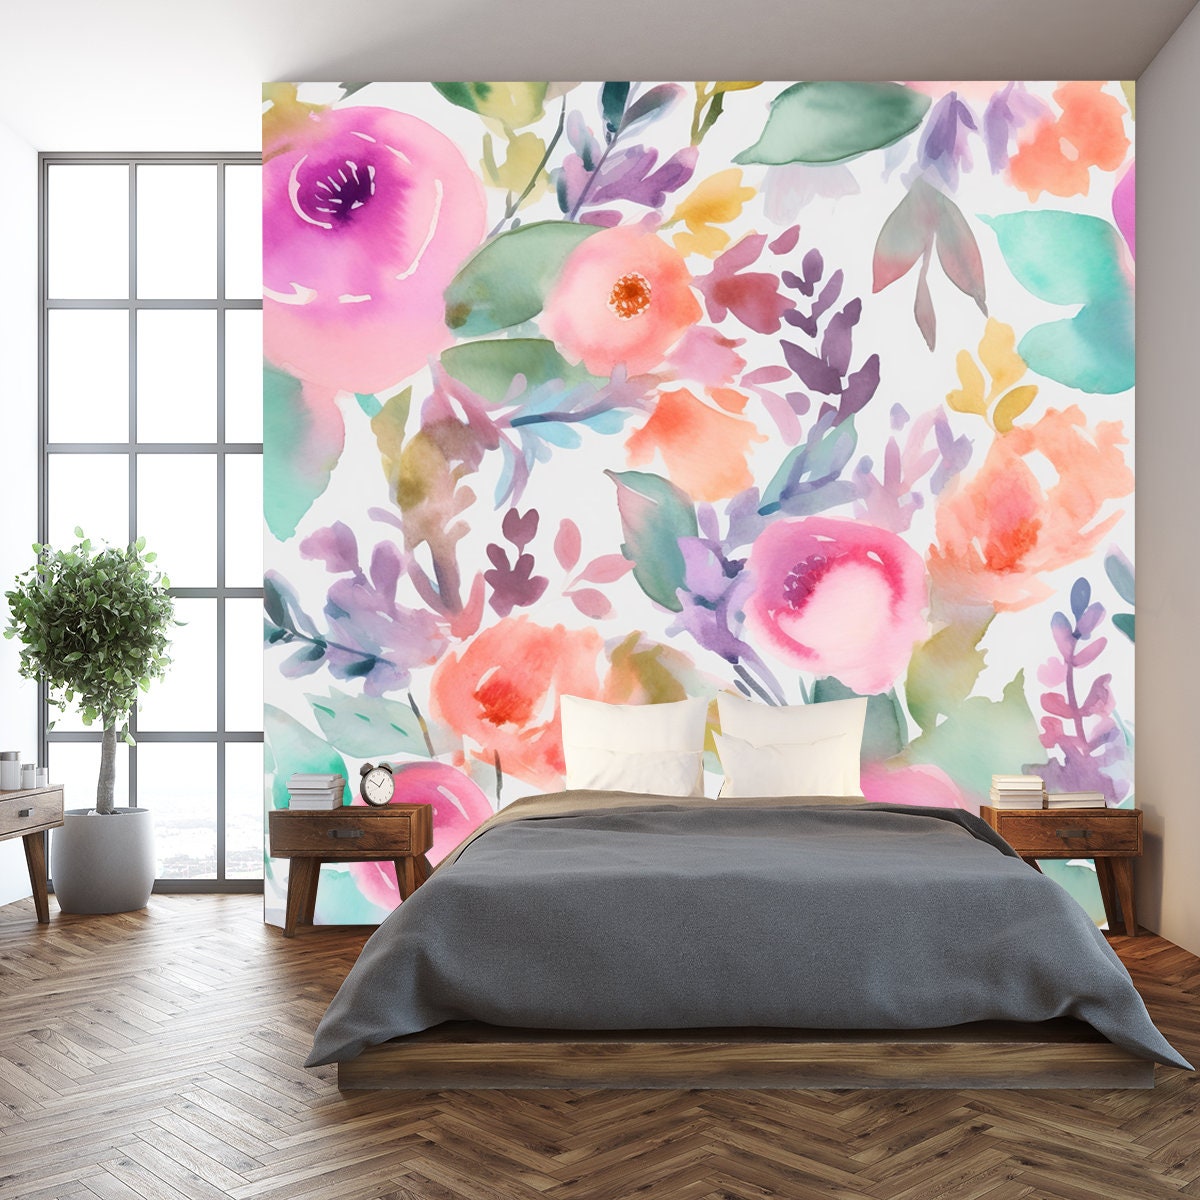 Exquisite Arrangement of Pale Watercolor Flowers, Delicate Forms Rendered in Soft, Dreamy Hues Wallpaper Bedroom Mural